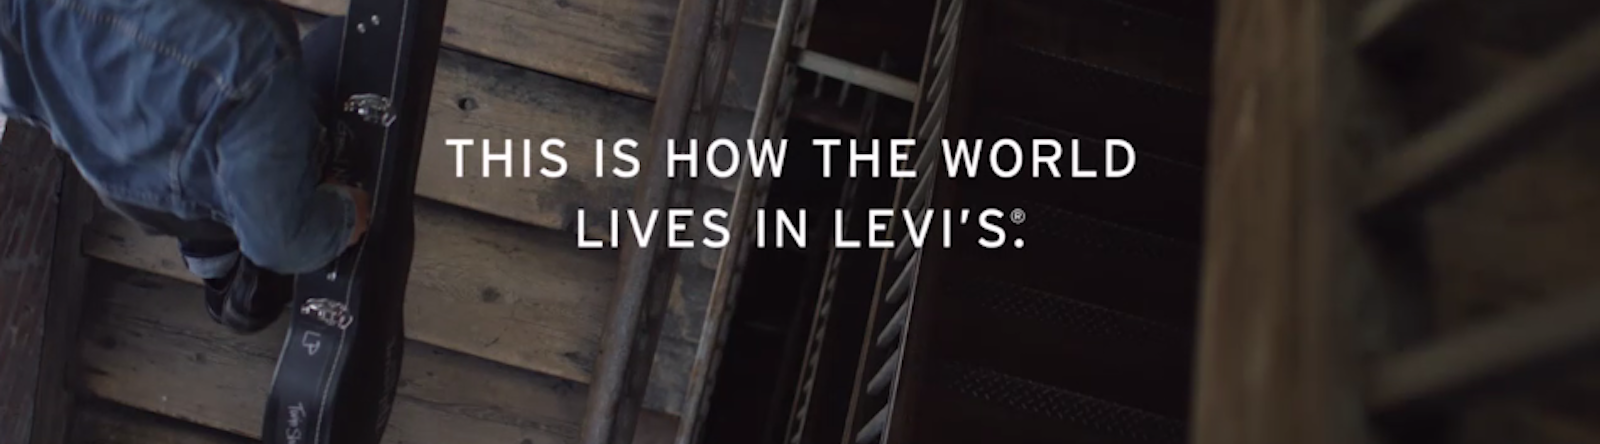 Levi's digital strategy gets a leg up from Google - Digiday